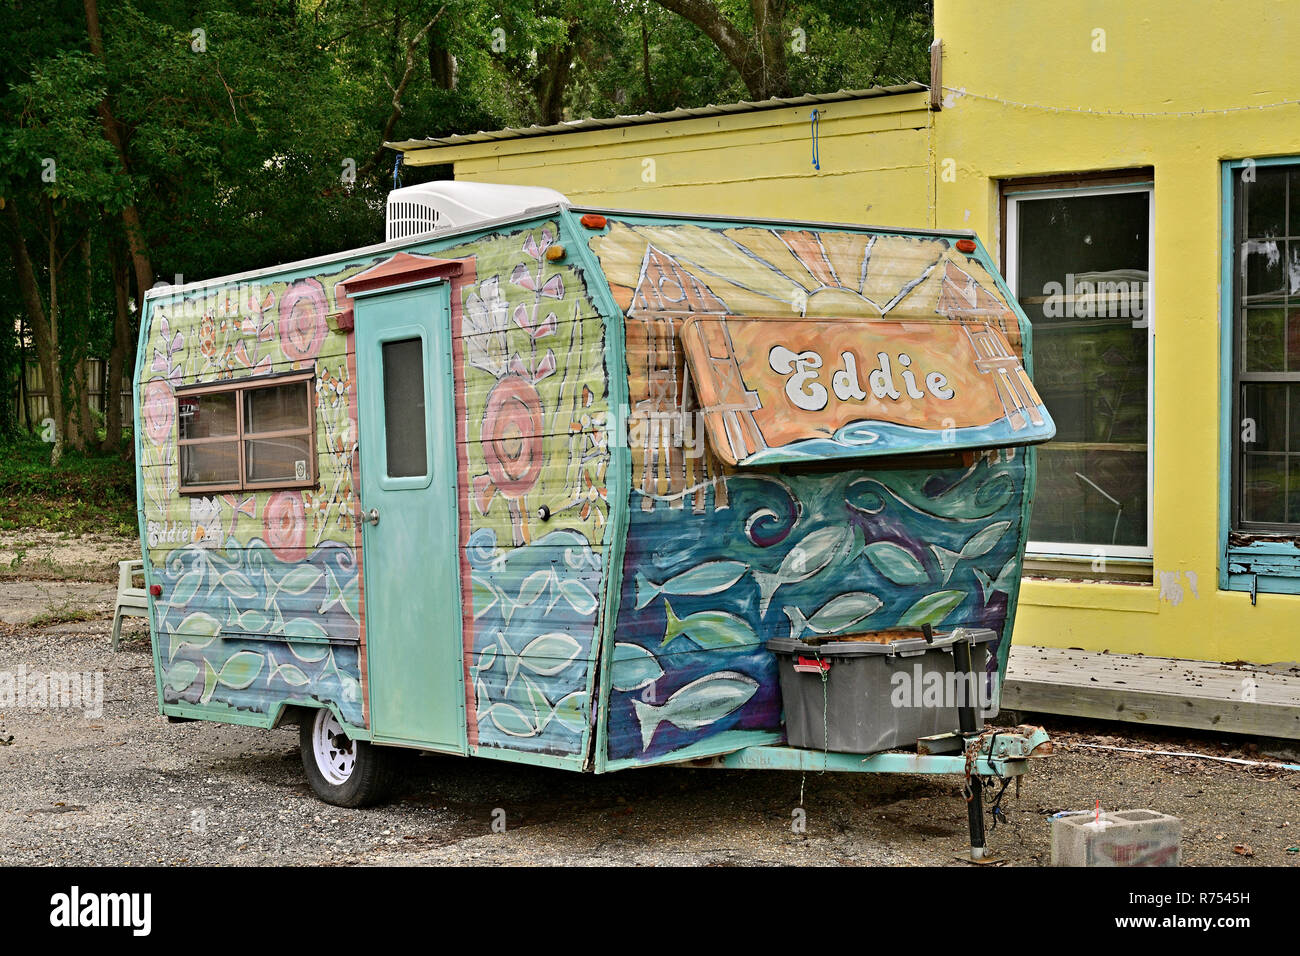 Unique, funky and brightly painted old small travel trailer in Fairhope Alabama, USA. Stock Photo